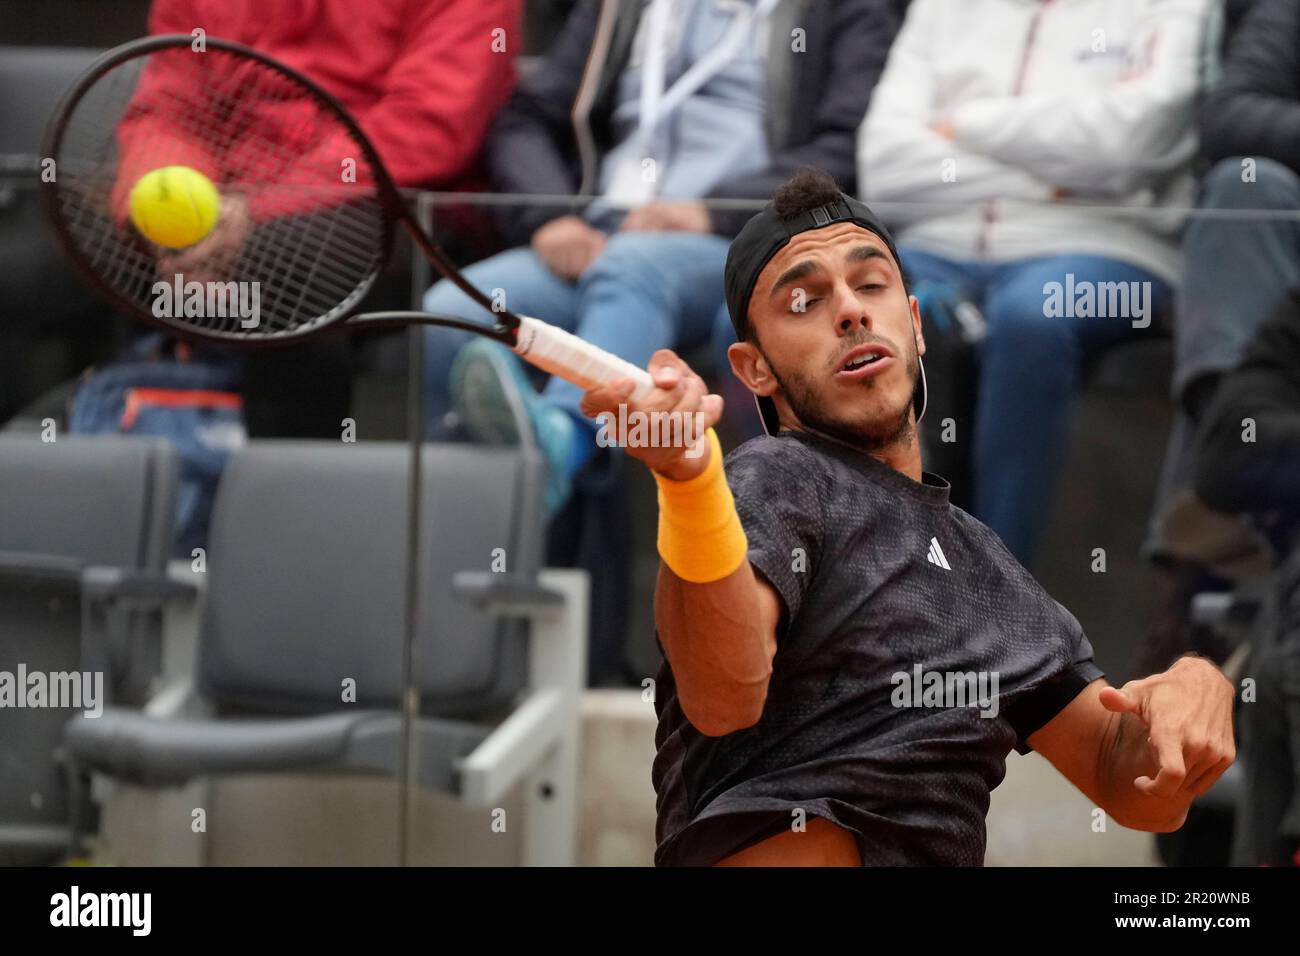 Argentinas Francisco Cerundolo returns the ball to Italys Jannik Sinner during their match at the Italian Open tennis tournament, in Rome, Tuesday, May 16, 2023